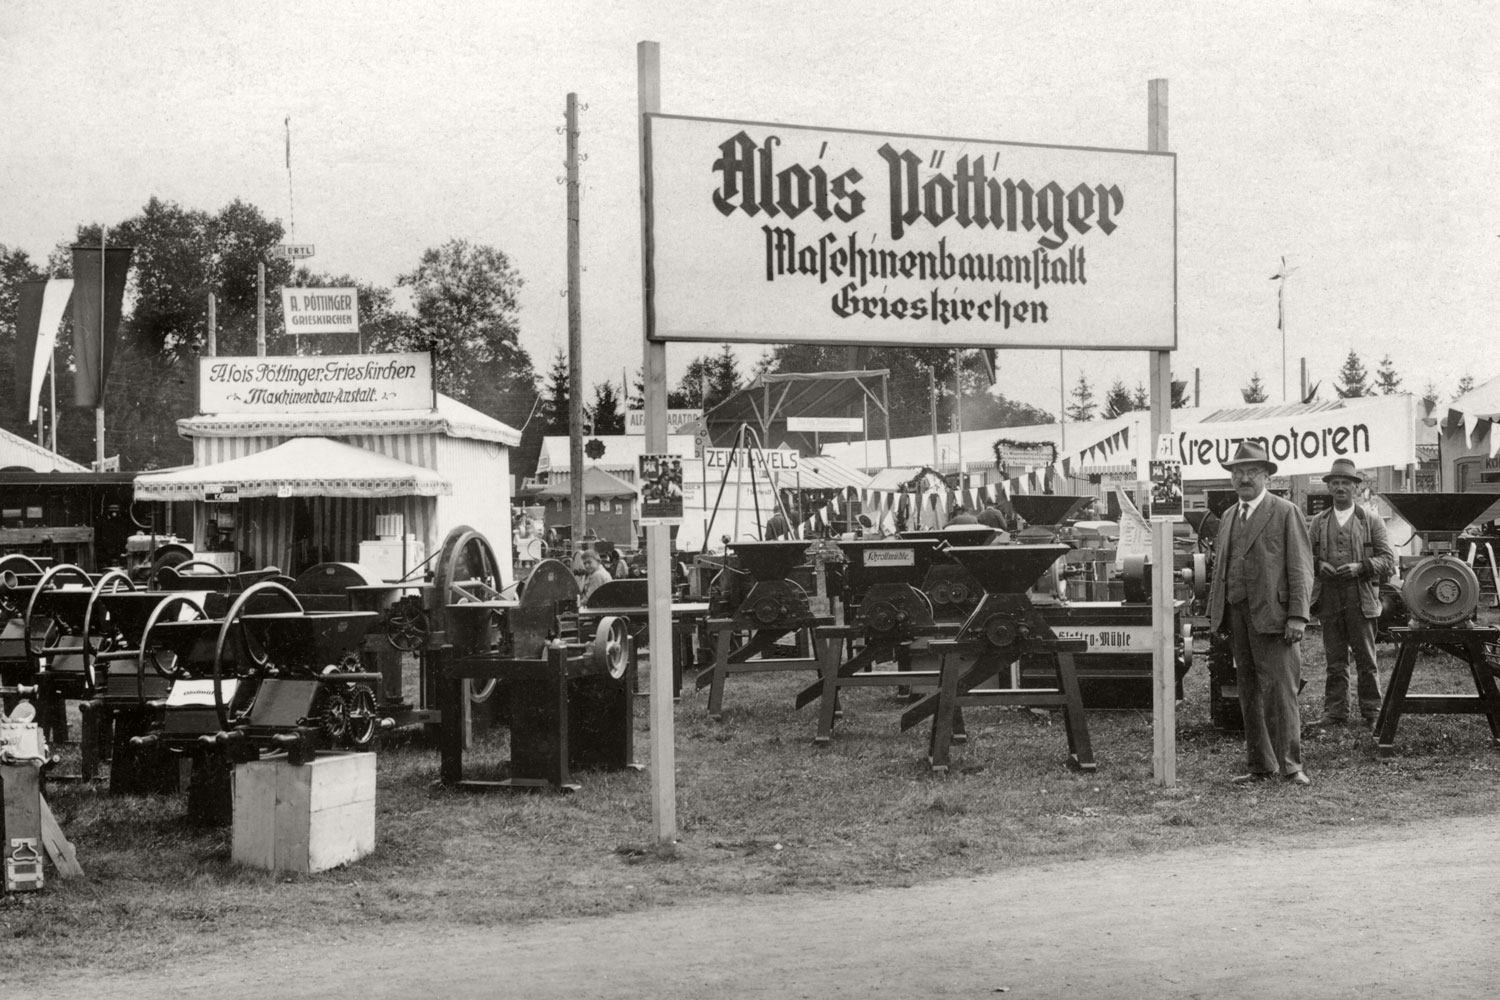 Even back then, money is invested in trade fair appearances – just look at the tent at the back. A proud Alois Pöttinger stands out front.